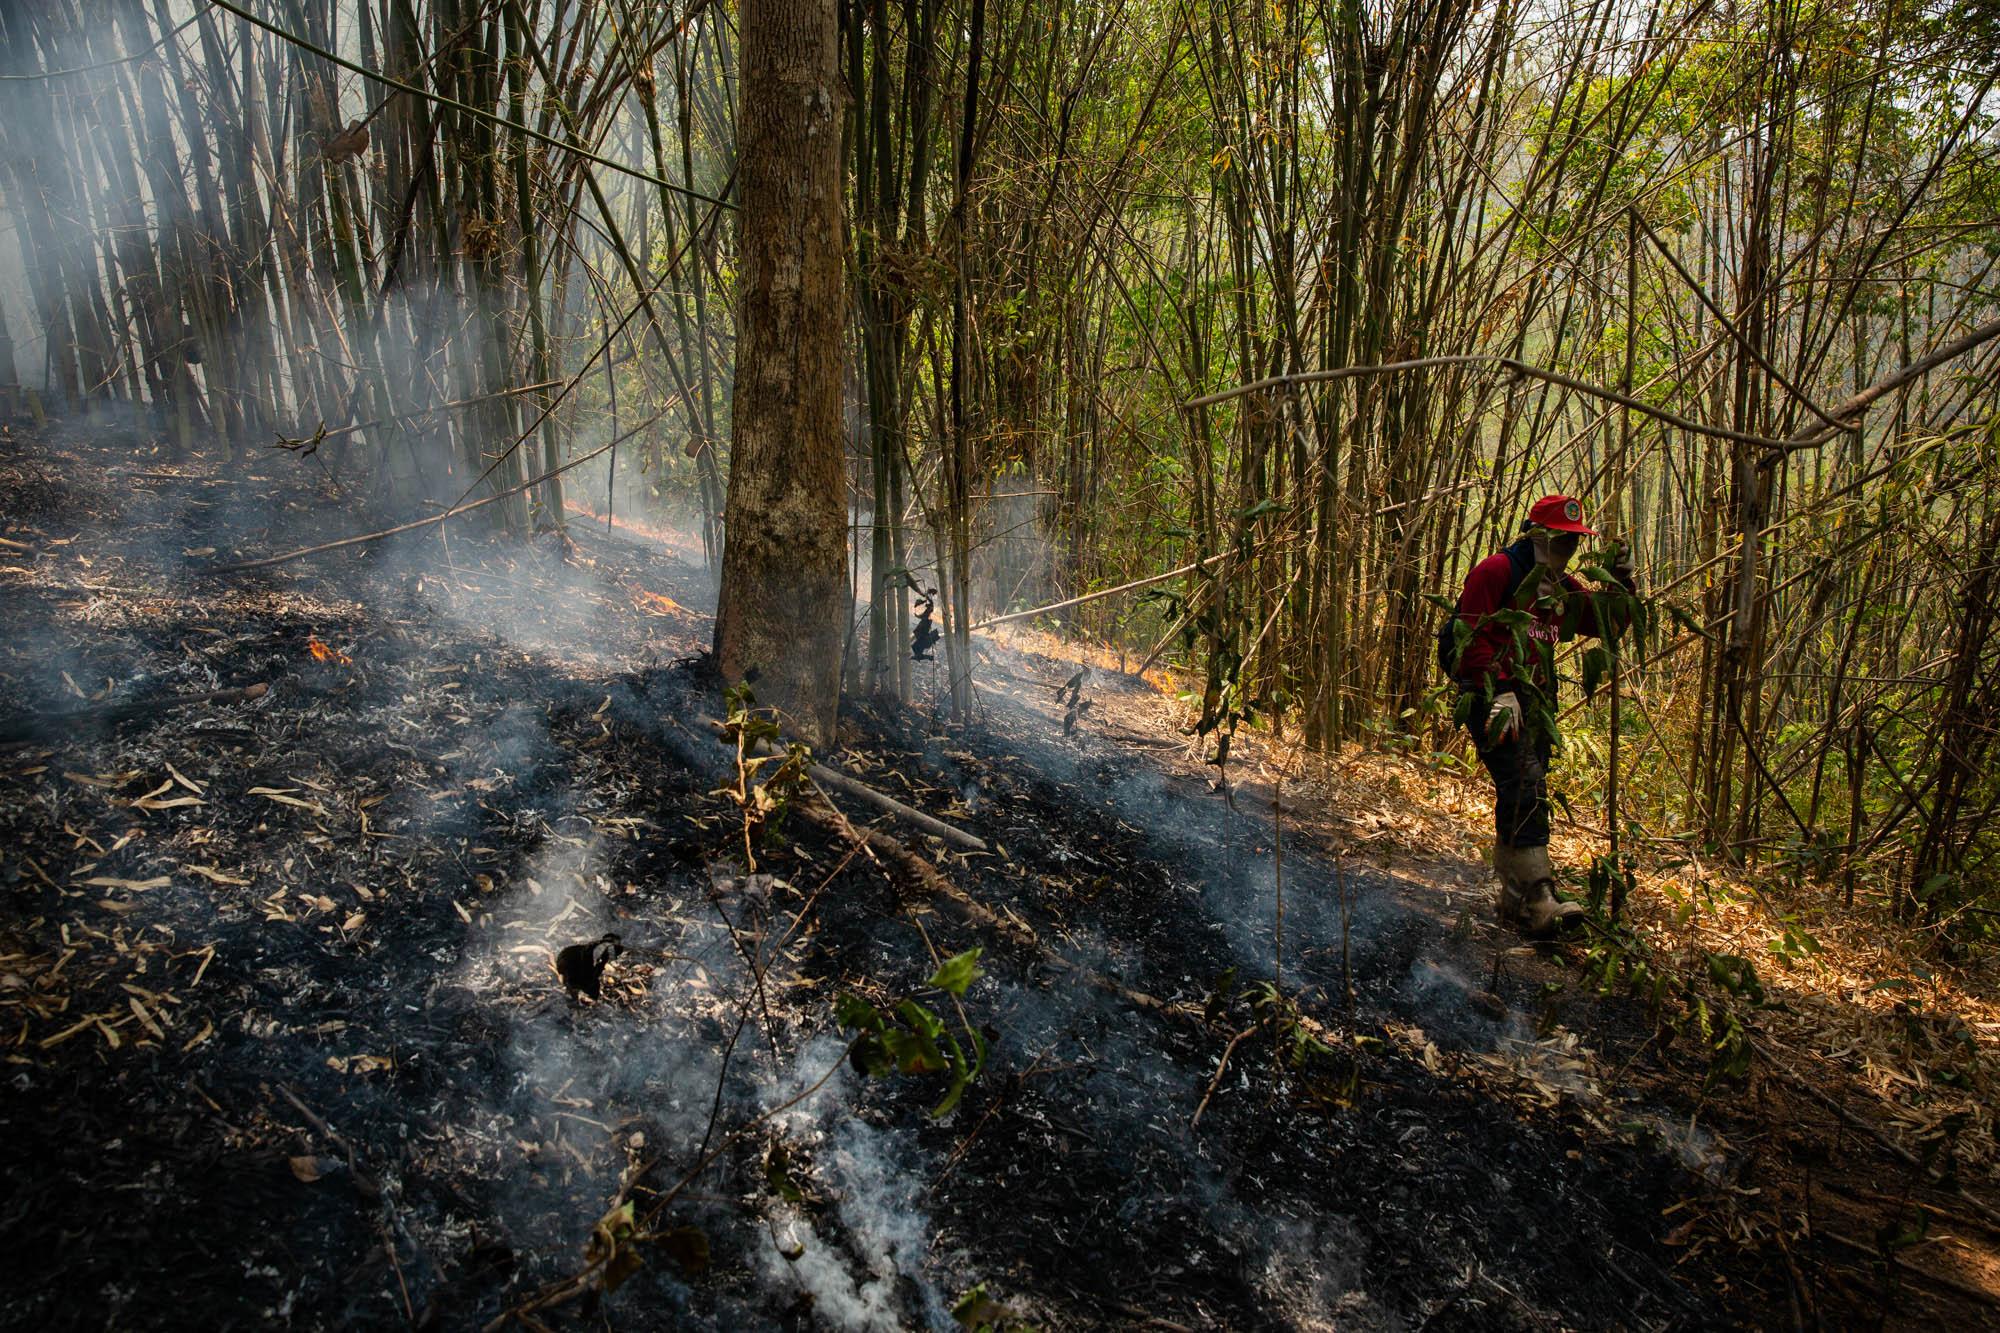 Thailand Burns - The smoking remnants of a forest fire near the...